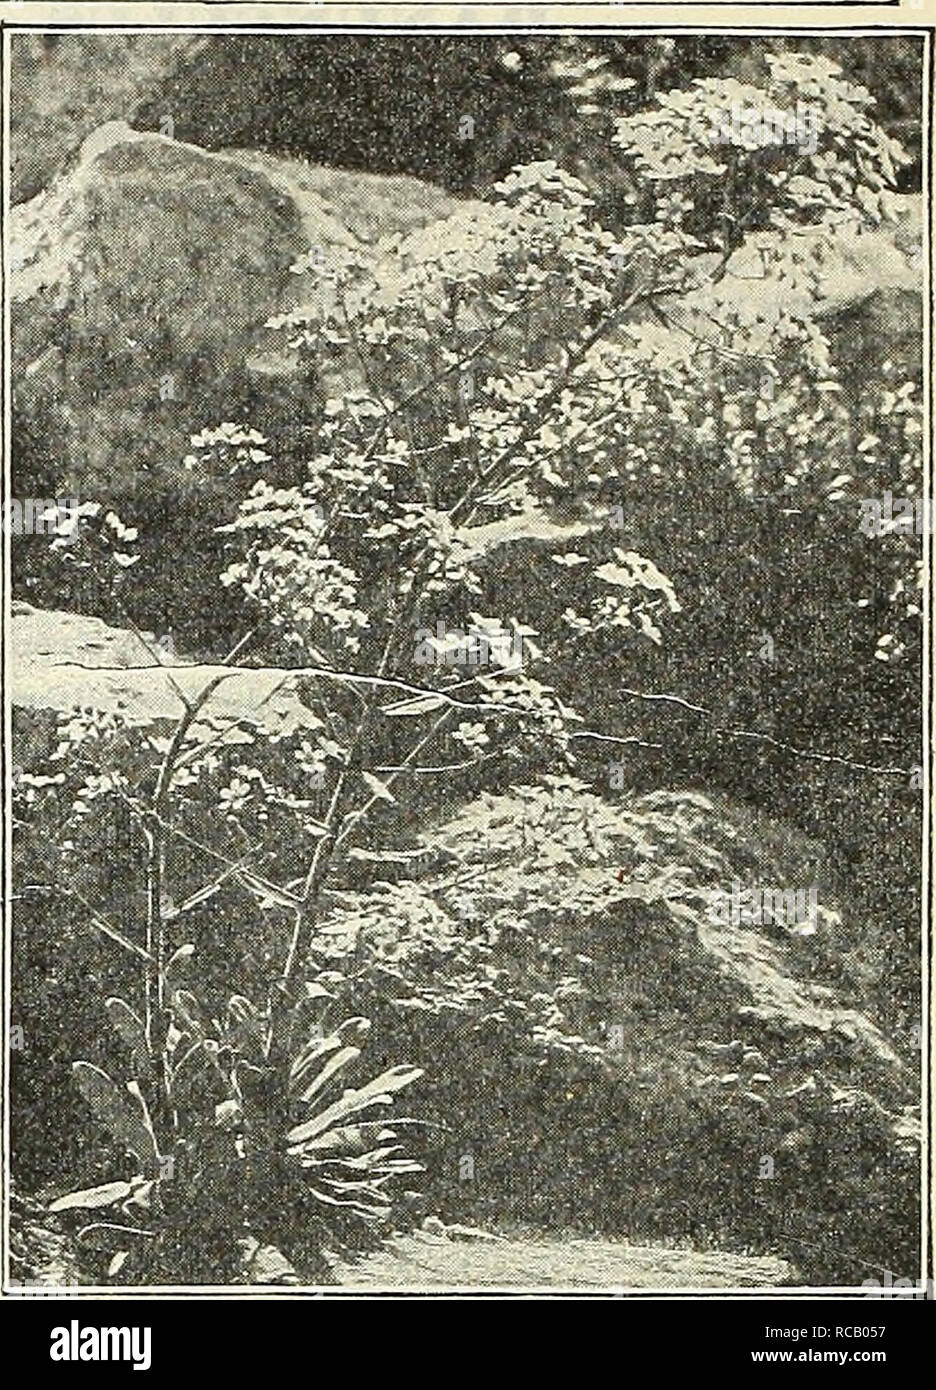 . Dreer's garden book : 1905. Seeds Catalogs; Nursery stock Catalogs; Gardening Equipment and supplies Catalogs; Flowers Seeds Catalogs; Vegetables Seeds Catalogs; Fruit Seeds Catalogs. Sedum Spectabilis. Saxifraga Pykamidalis. SEDUM (Stone-crop). DWARF VARIETIES, vSuitable for the rockery, carpet bedding, etc. Acre {Golden Moss). Much used for covering graves, foliage green, flowers bright yellow. Album. Green foliage, white flowers. Lydium Aureum. Small yellow loliage and pink flowers. — Glaucum. Small glaucous green foliage and pink flowers. Pulchellum {Birds'-foot Stone- (rop). Foliage red Stock Photo